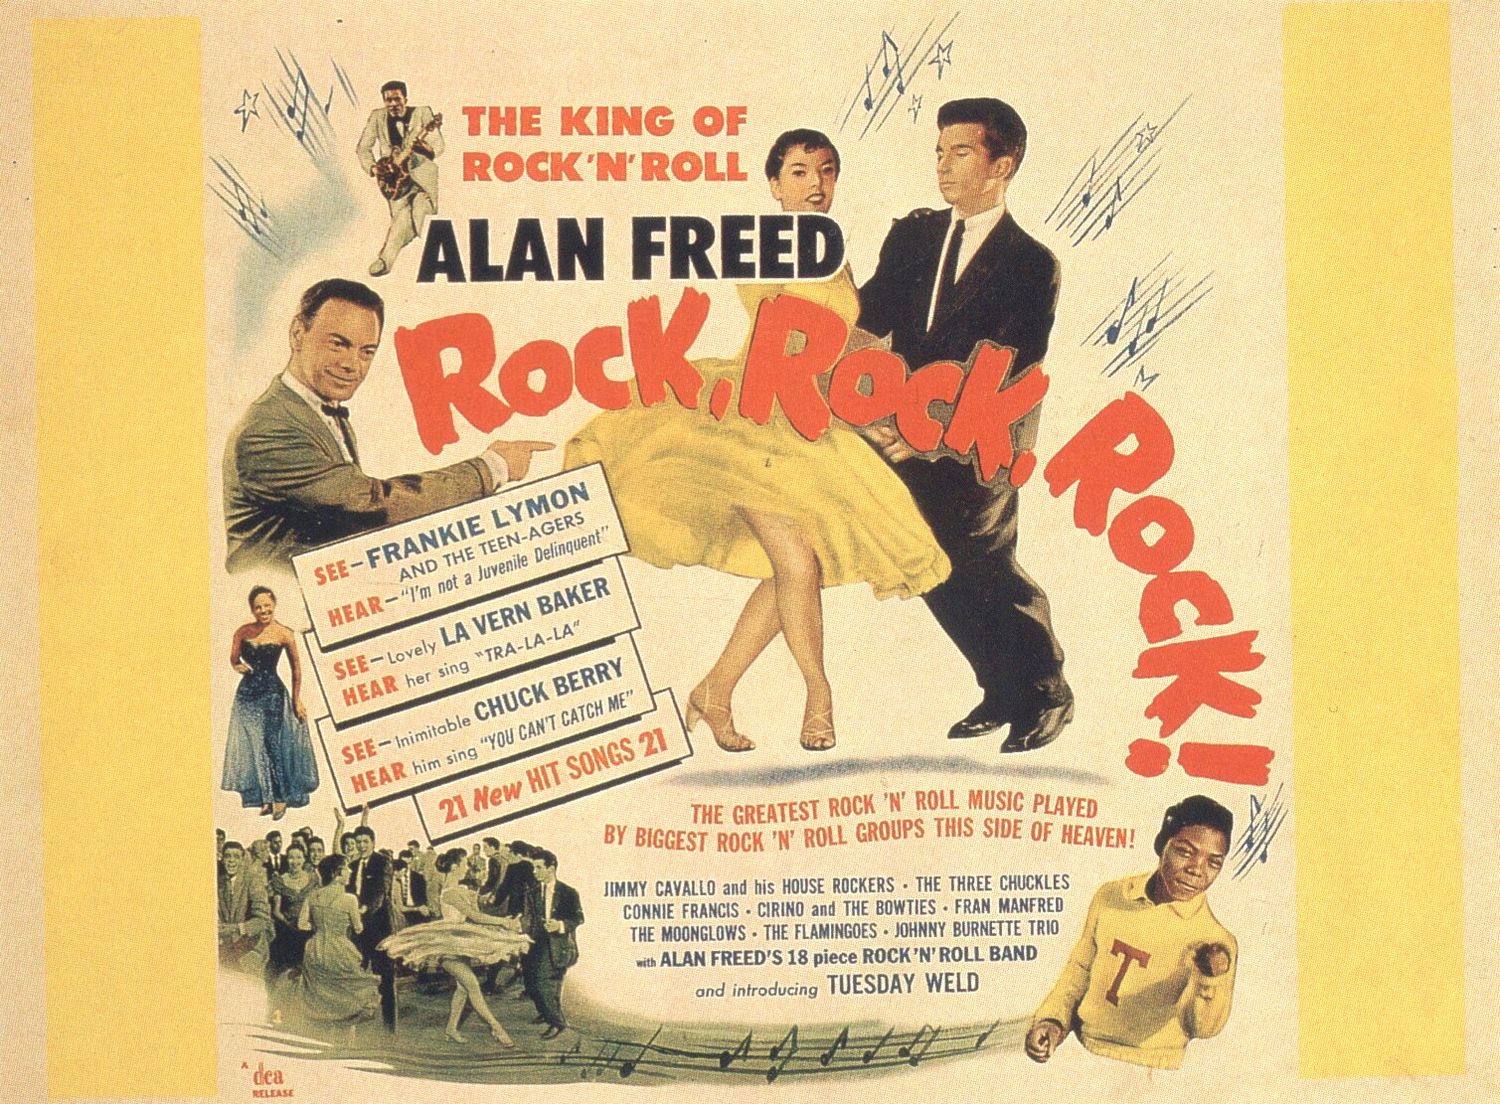 Extra Large Movie Poster Image for Rock, Rock, Rock 